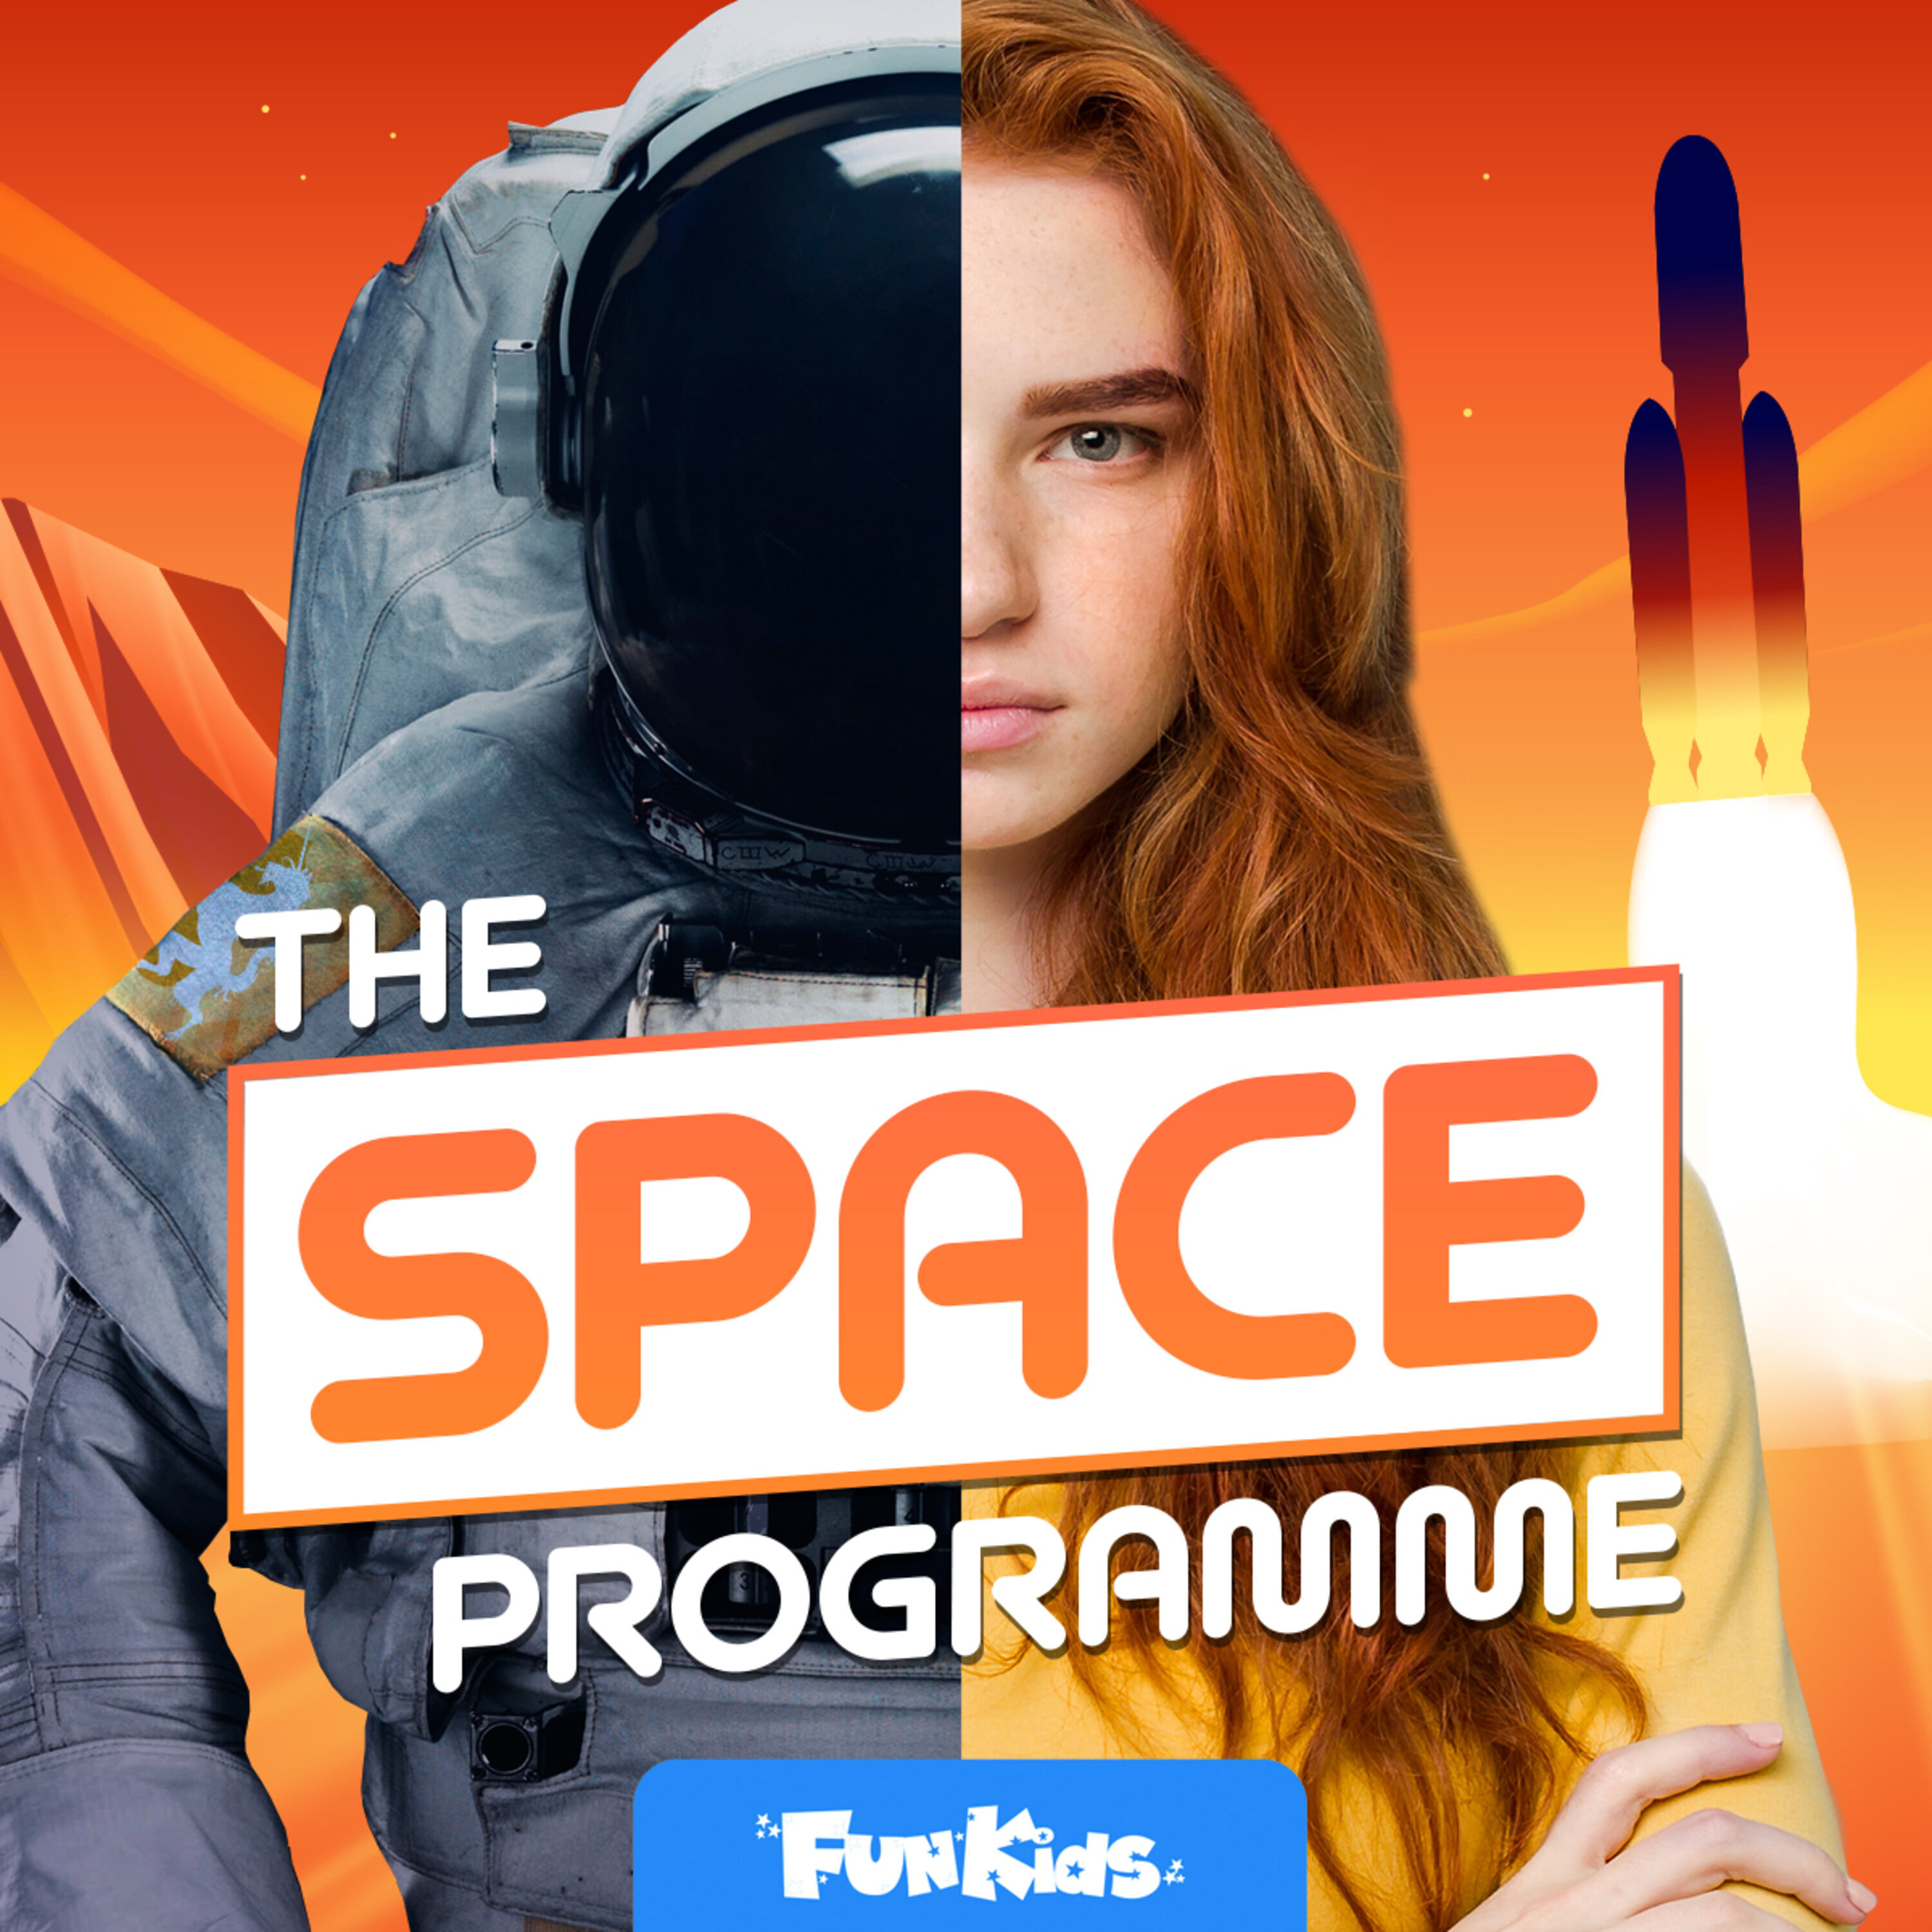 The Space Programme